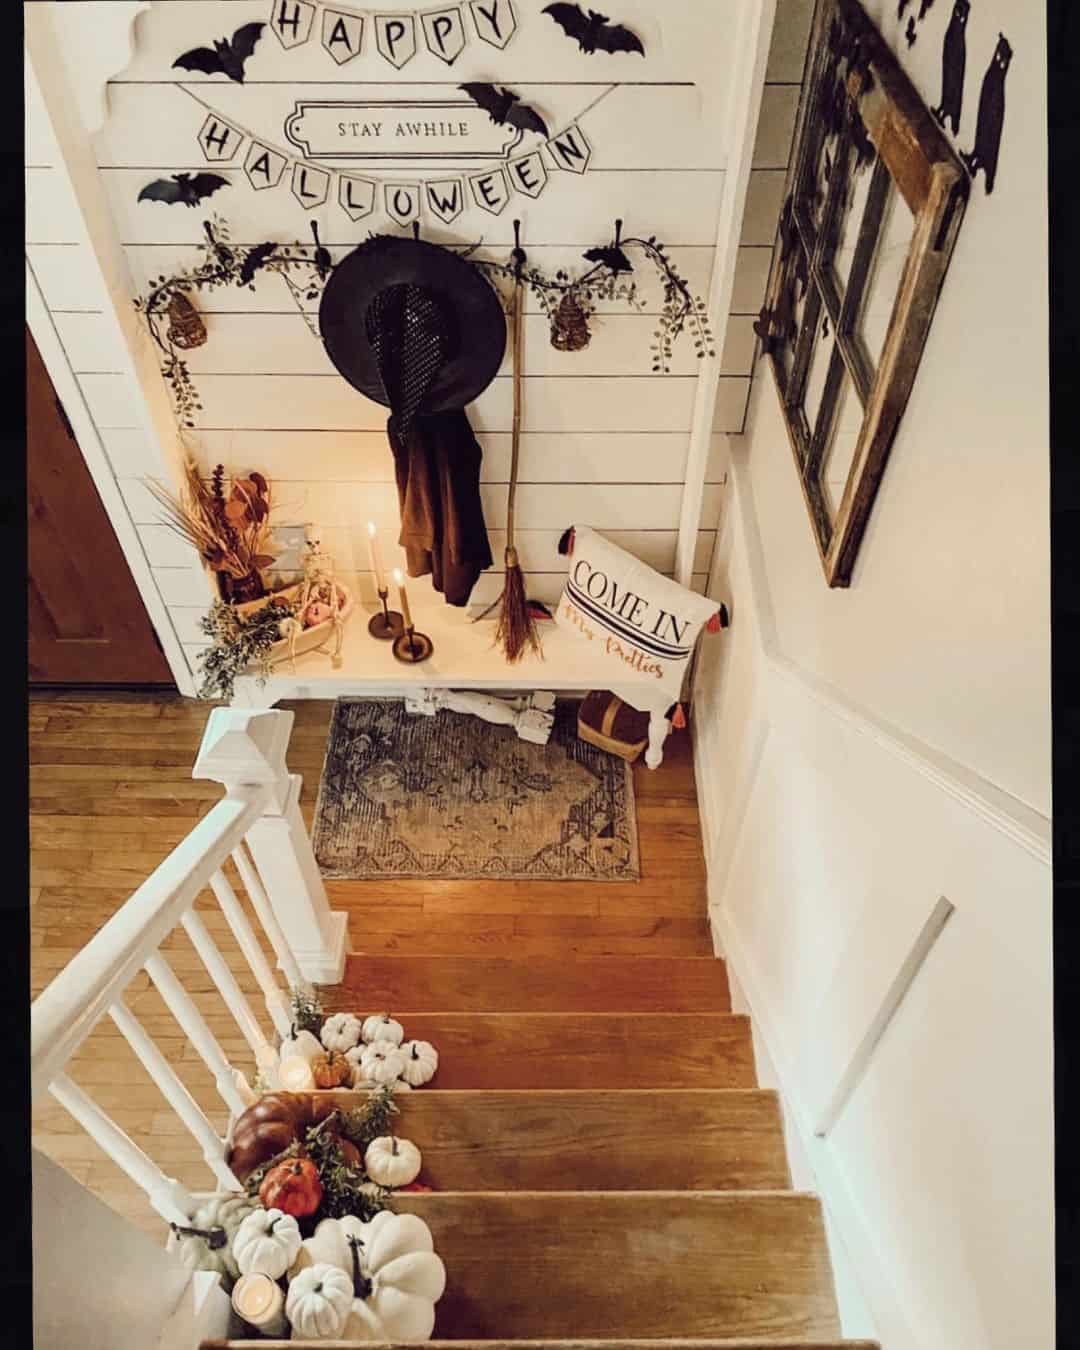 36 Fun Halloween Witch Decor Ideas to Dress Up Your Home